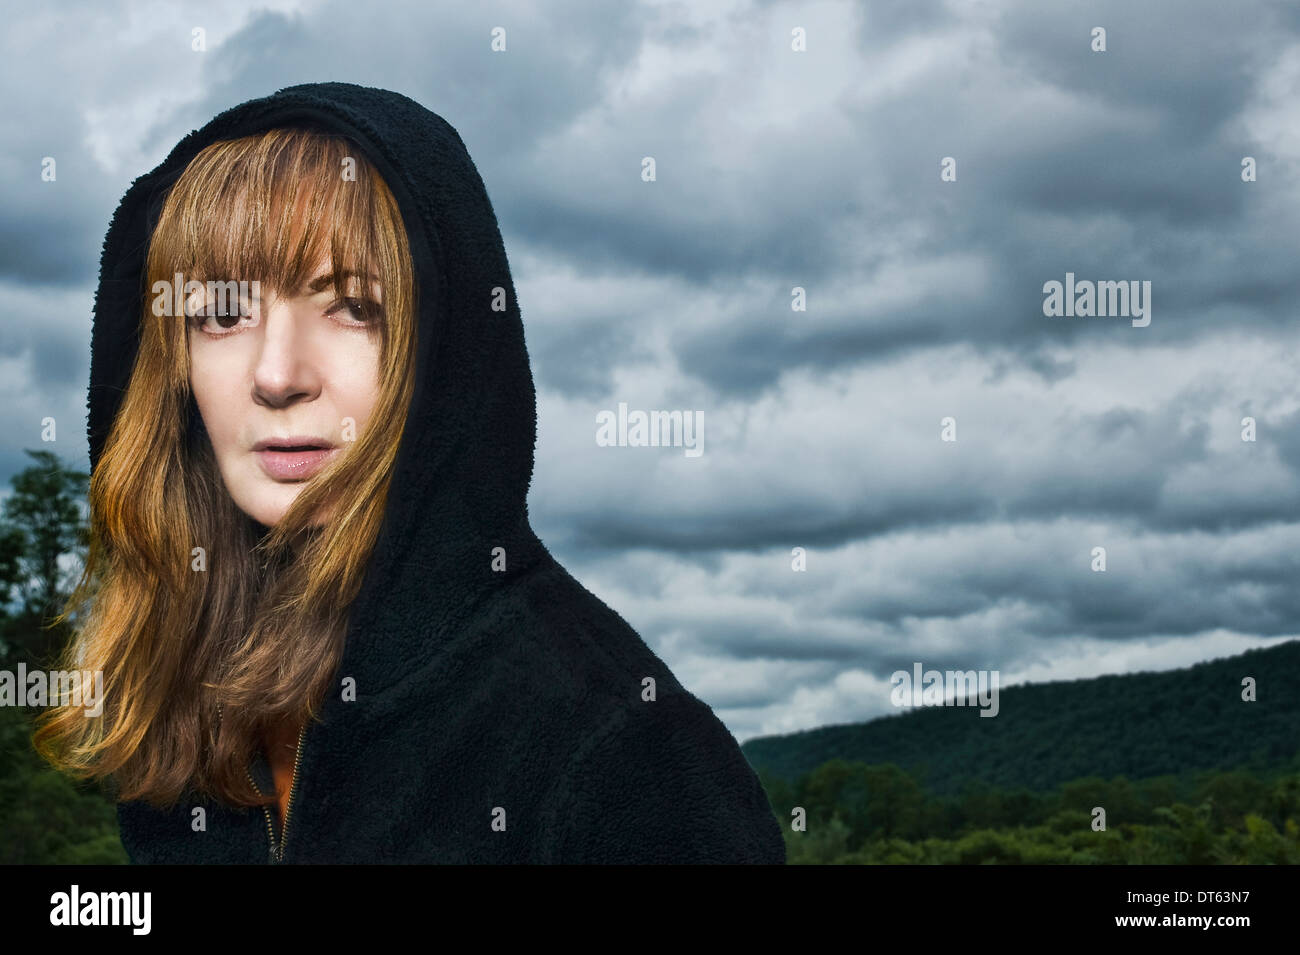 Portrait of mature woman wearing hooded top Stock Photo